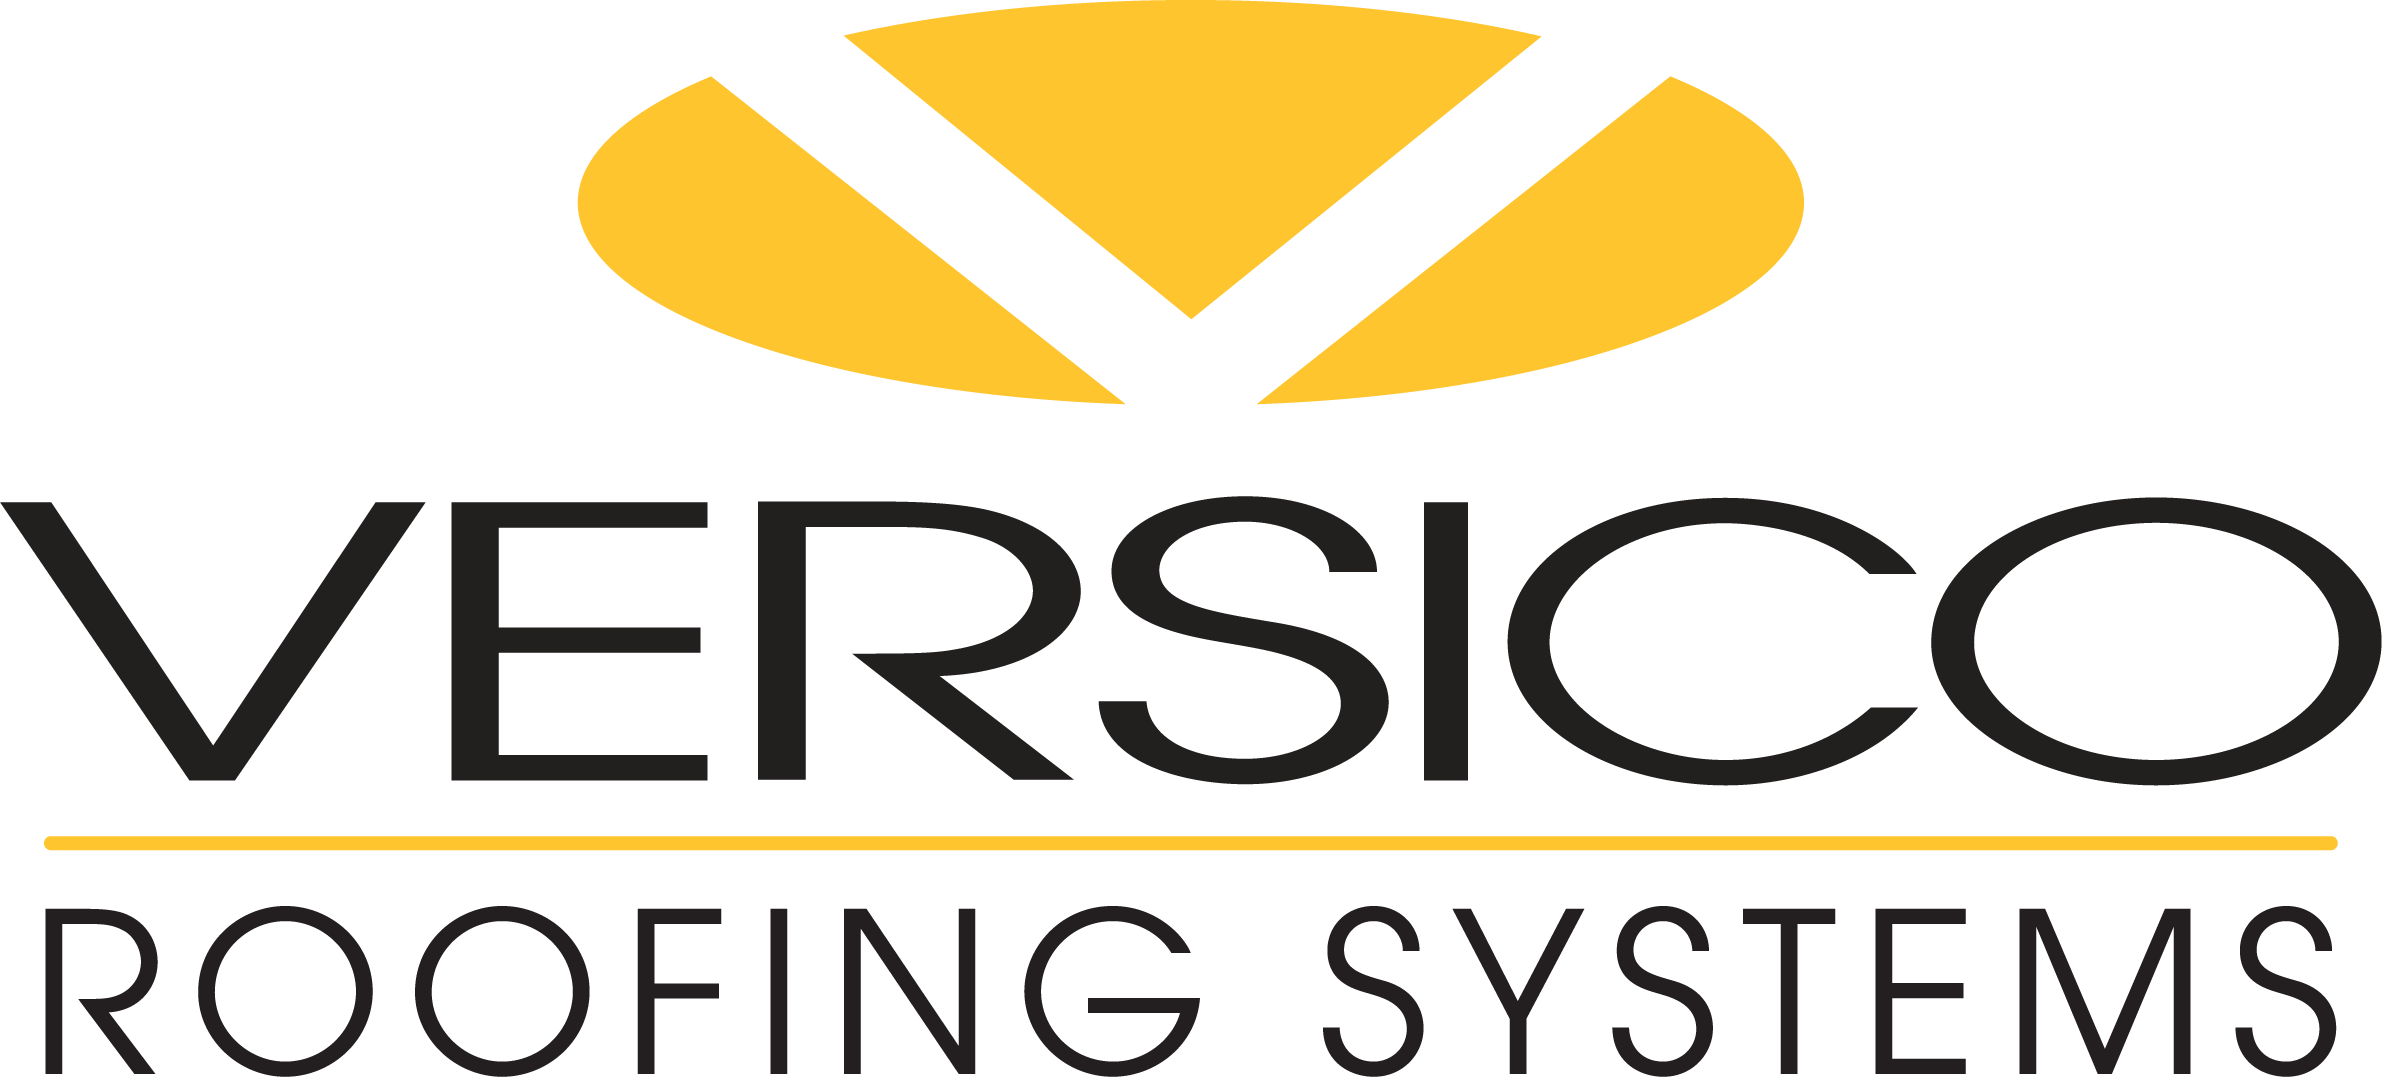 Orange V logo with text under the logo that says Versico Roofing Systems.